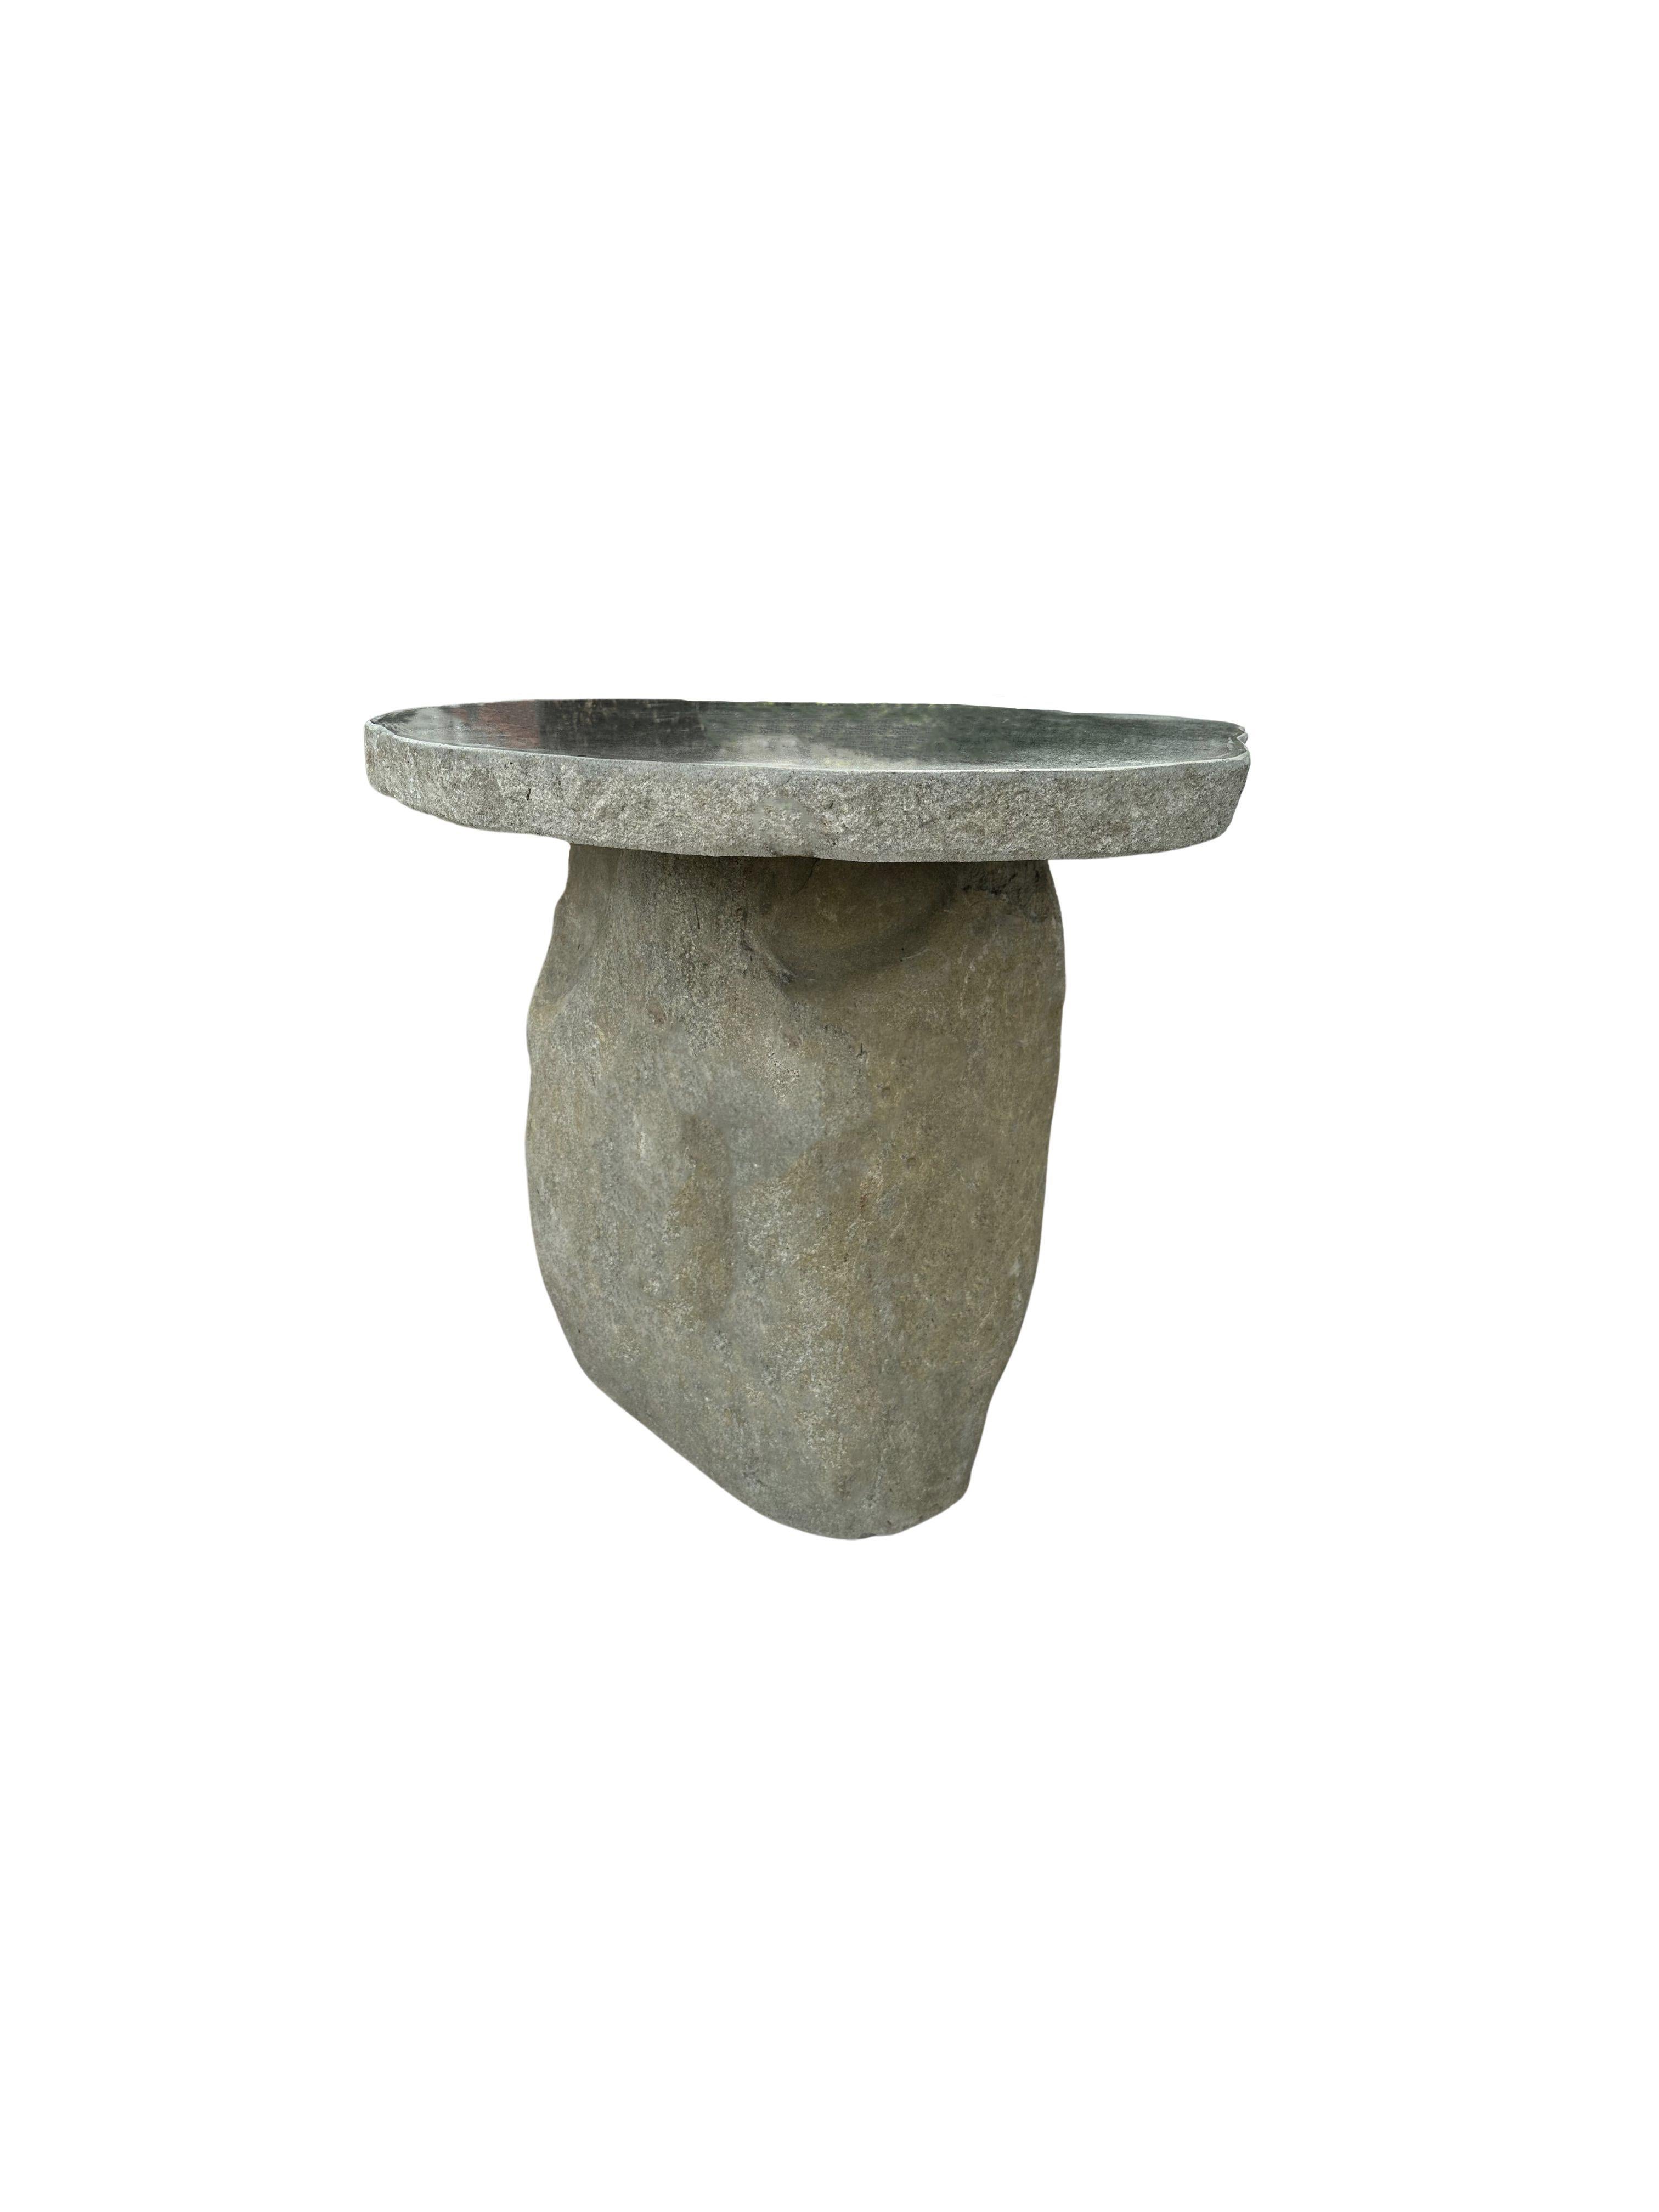 A incredibly heavy and solid rounded stone table. This lovely sculptural object was crafted from 2 solid stones sourced from a river bed in East Java. A raw and organic object with beautiful textures. Its top side was cut, sanded down and polished